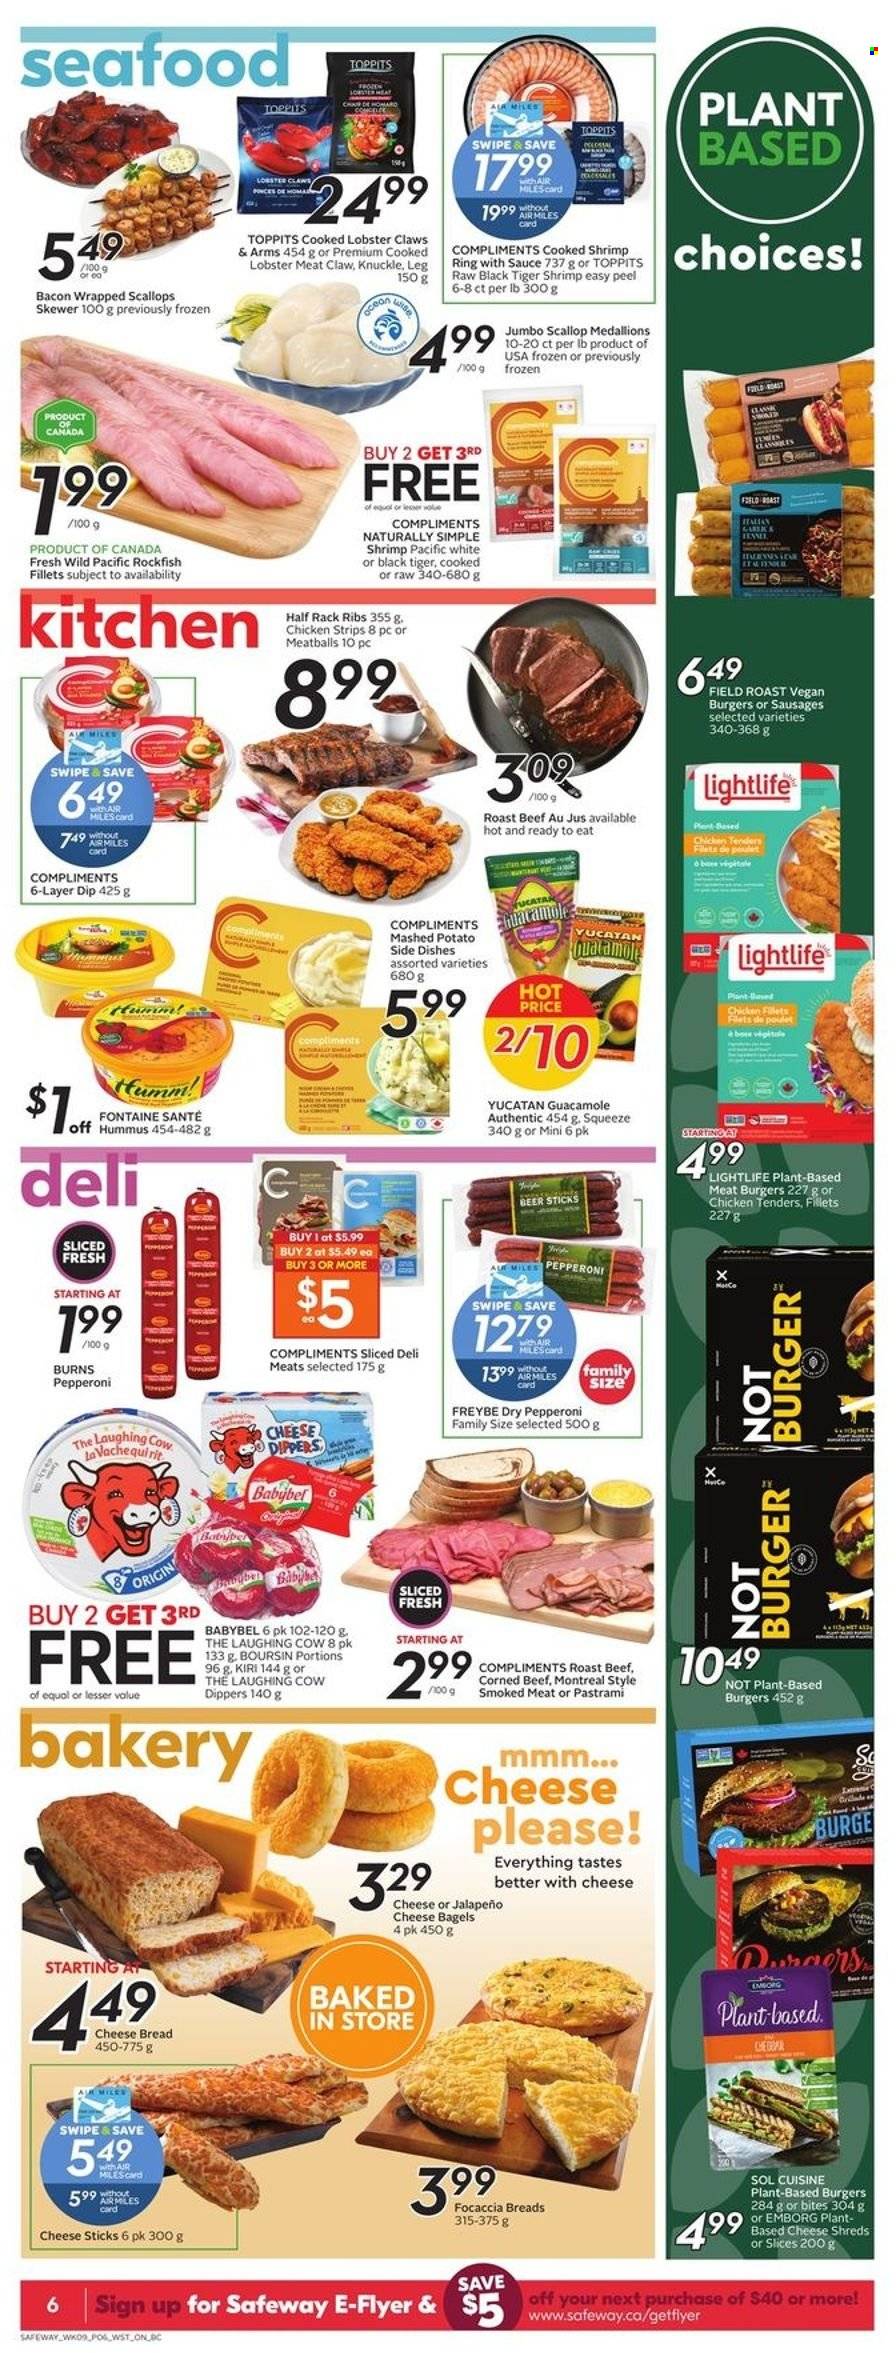 thumbnail - Safeway Flyer - June 30, 2022 - July 06, 2022 - Sales products - bagels, bread, focaccia, bacon wrapped scallops, lobster, rockfish, scallops, seafood, shrimps, chicken tenders, meatballs, hamburger, veggie burger, bacon, pastrami, sausage, pepperoni, hummus, guacamole, corned beef, cheddar, cheese, Kiri, The Laughing Cow, Babybel, dip, strips, chicken strips, cheese sticks, beer, Sol, beef meat, roast beef. Page 8.